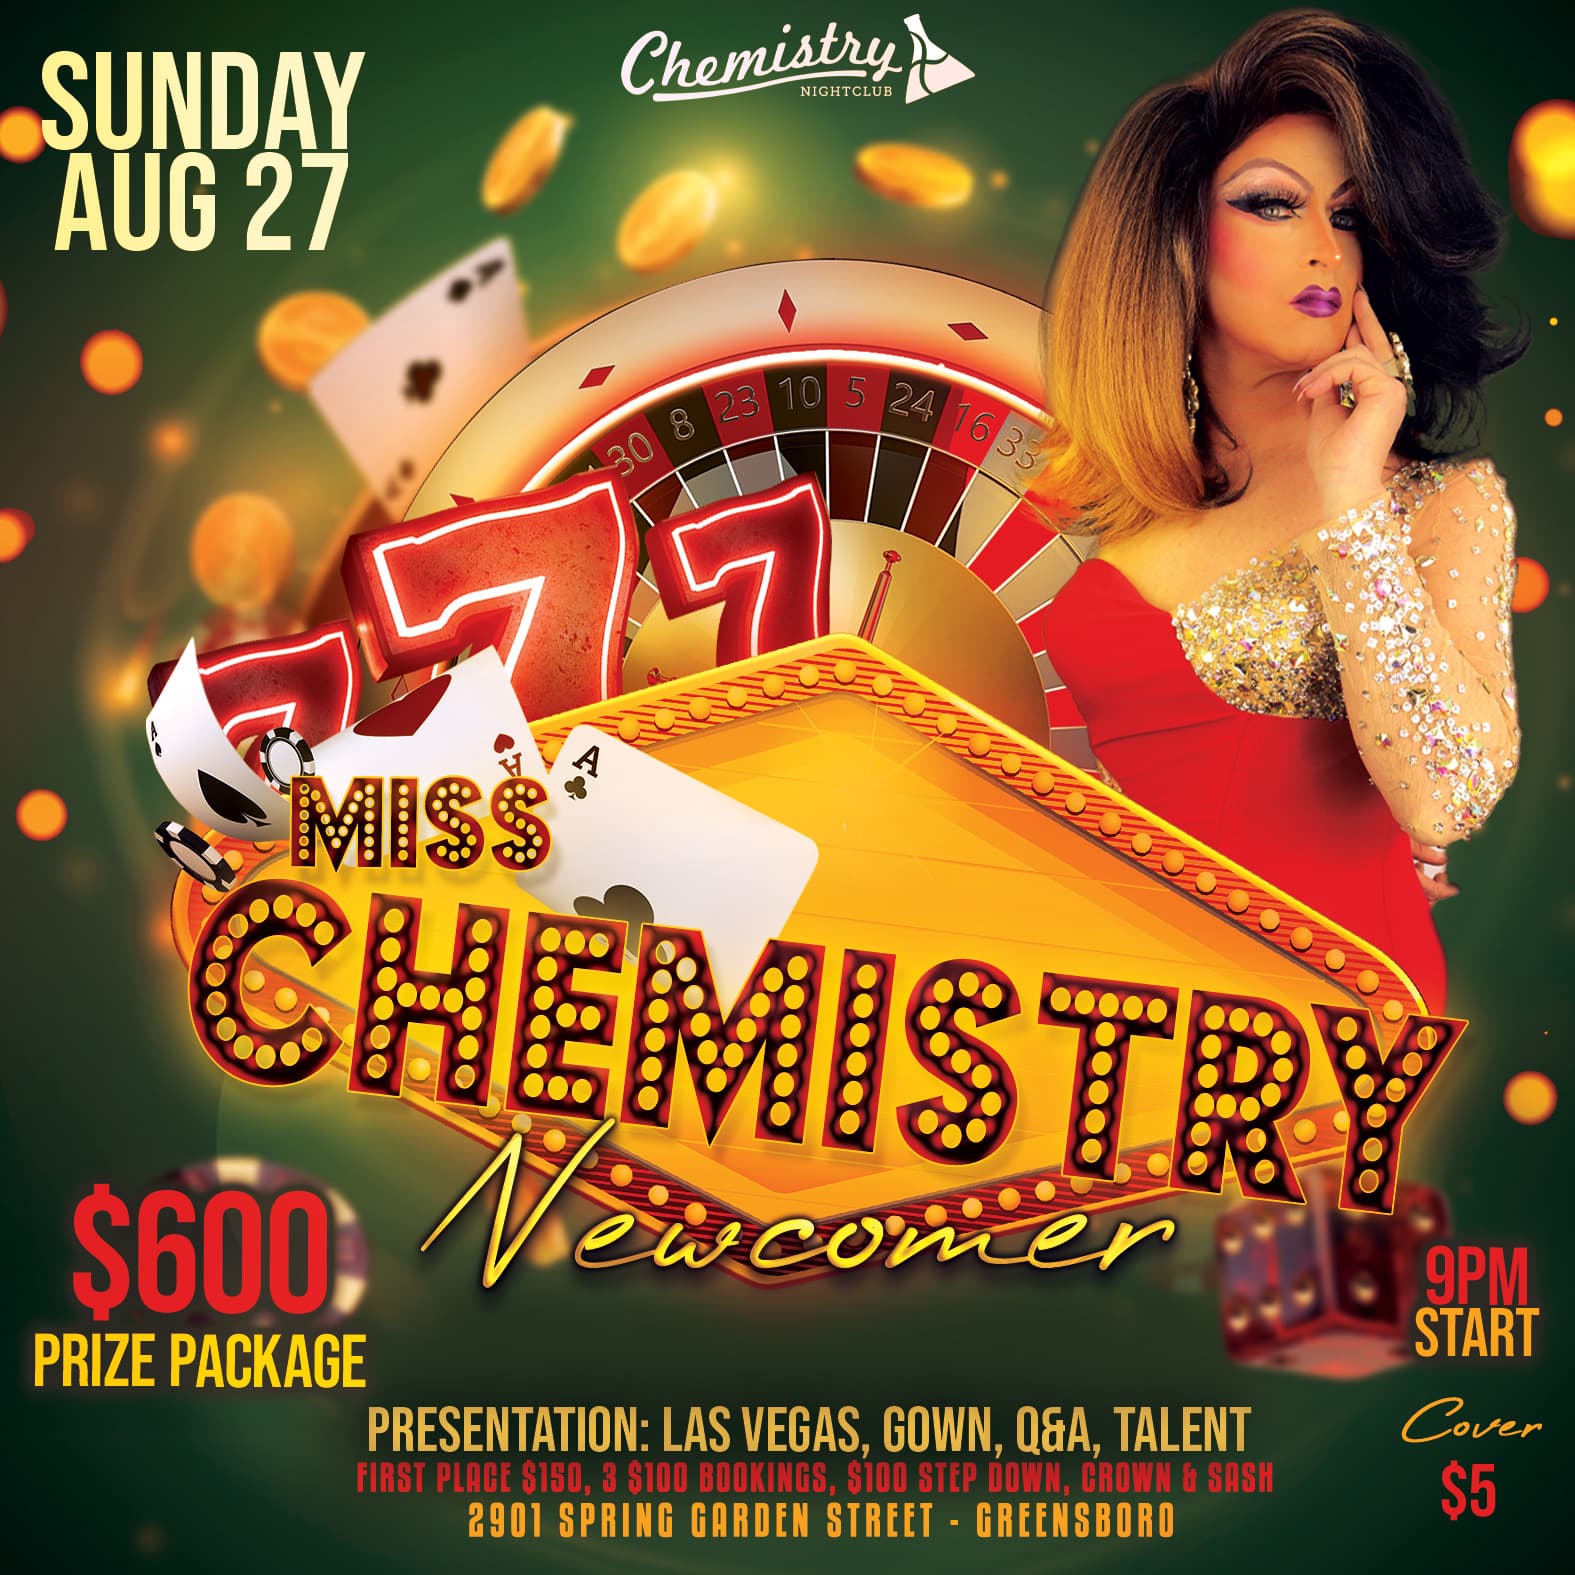 Miss Chemistry newcomer Aug 27